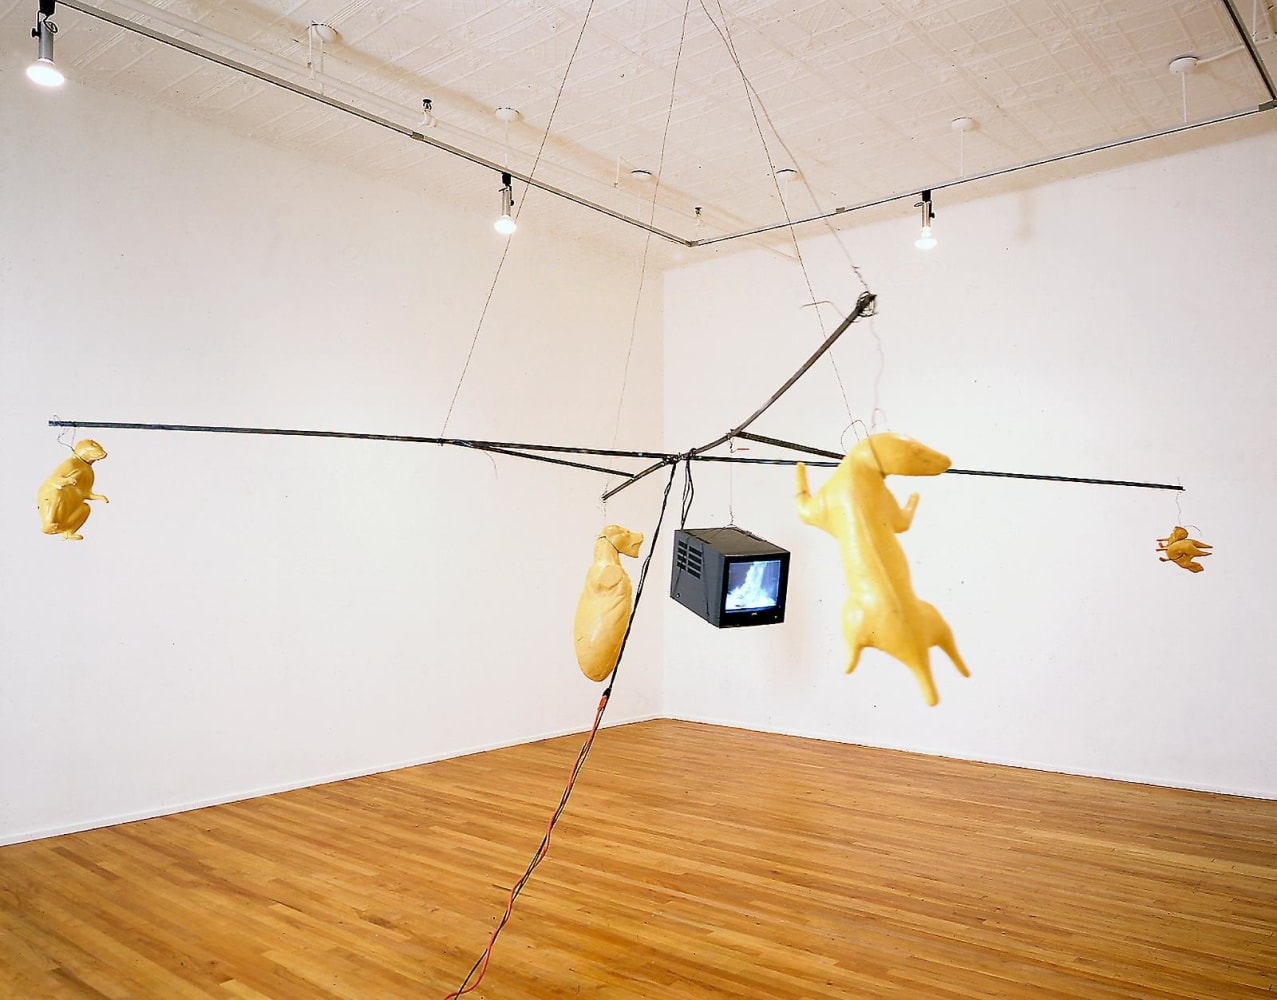 Bruce Nauman
Hanging Carousel (George Skins A Fox), 1988
steel, polyurethane foam, video monitor and videotape (color, sound)
204 inches (518,2 cm)&amp;nbsp;diameter, suspended 74 1/2 inches (189,2 cm) above the&amp;nbsp;floor
SW 88139
Collection of Museum of Contemporary Art Chicago